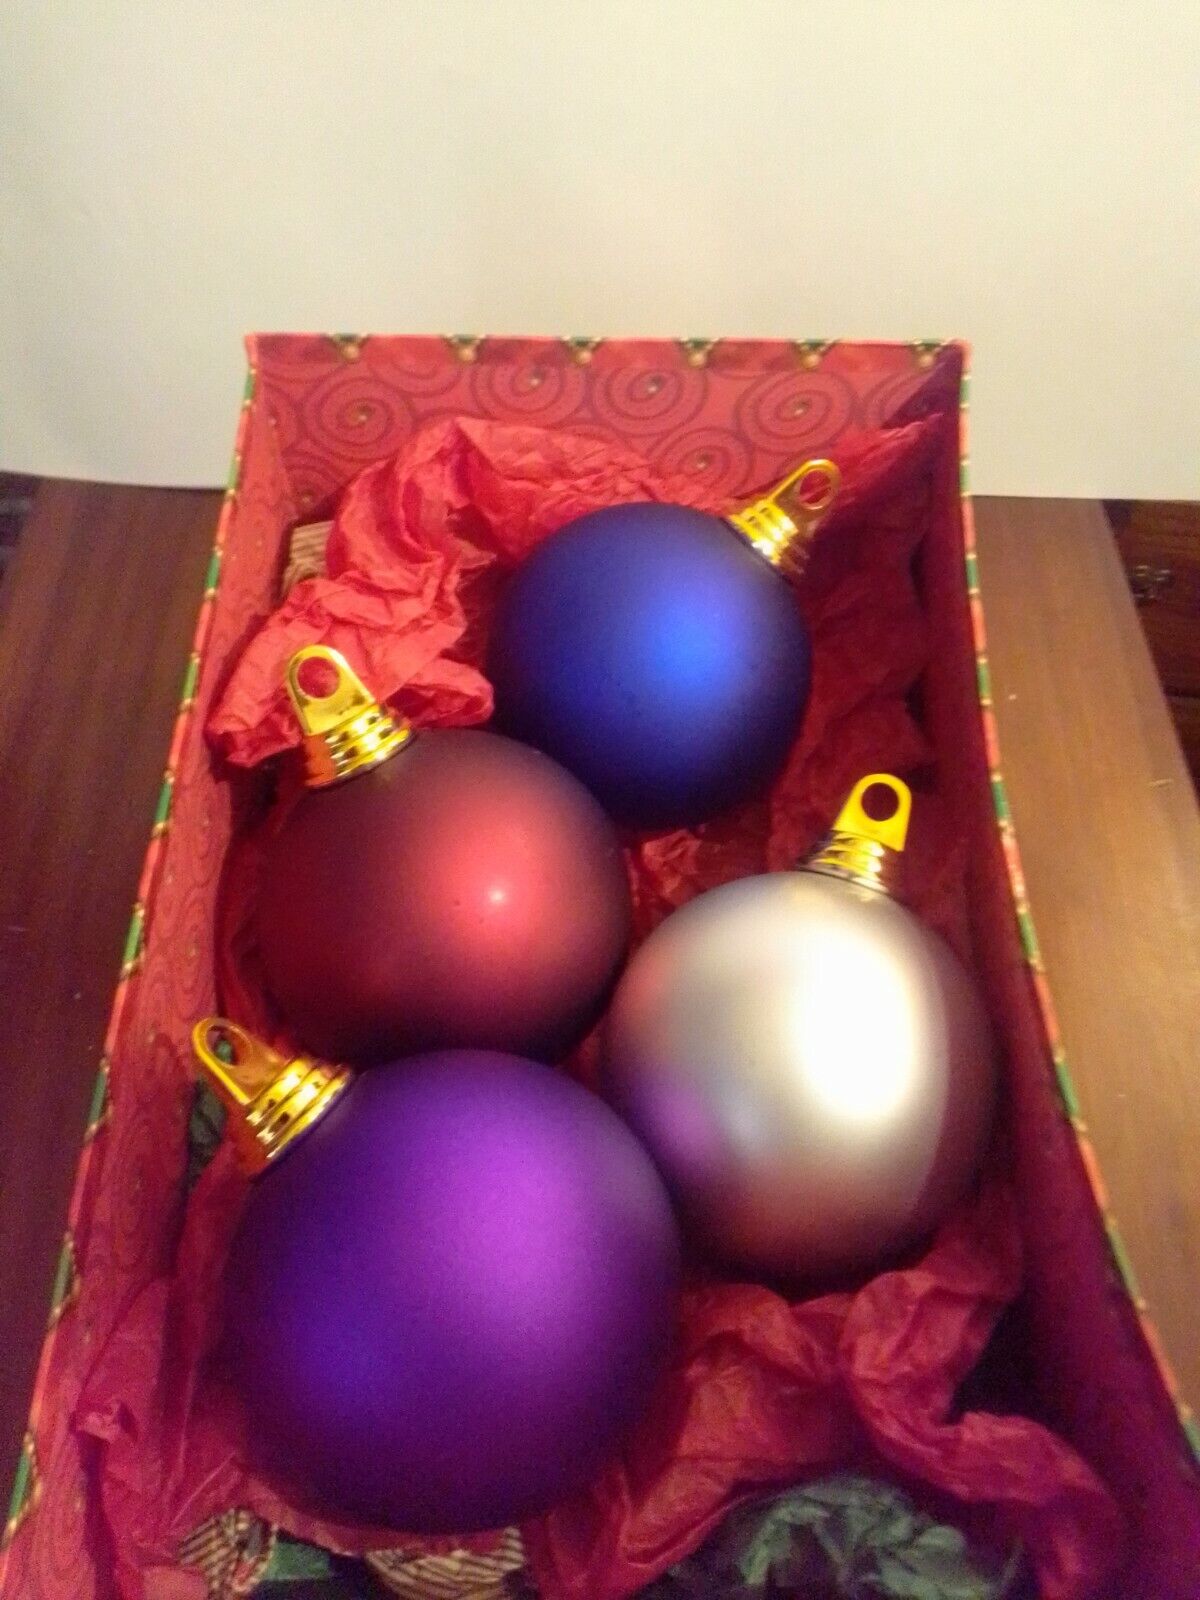 Set of 4 Vintage Large Christmas Ball Ornaments in Lindy Bowman Christmas Box